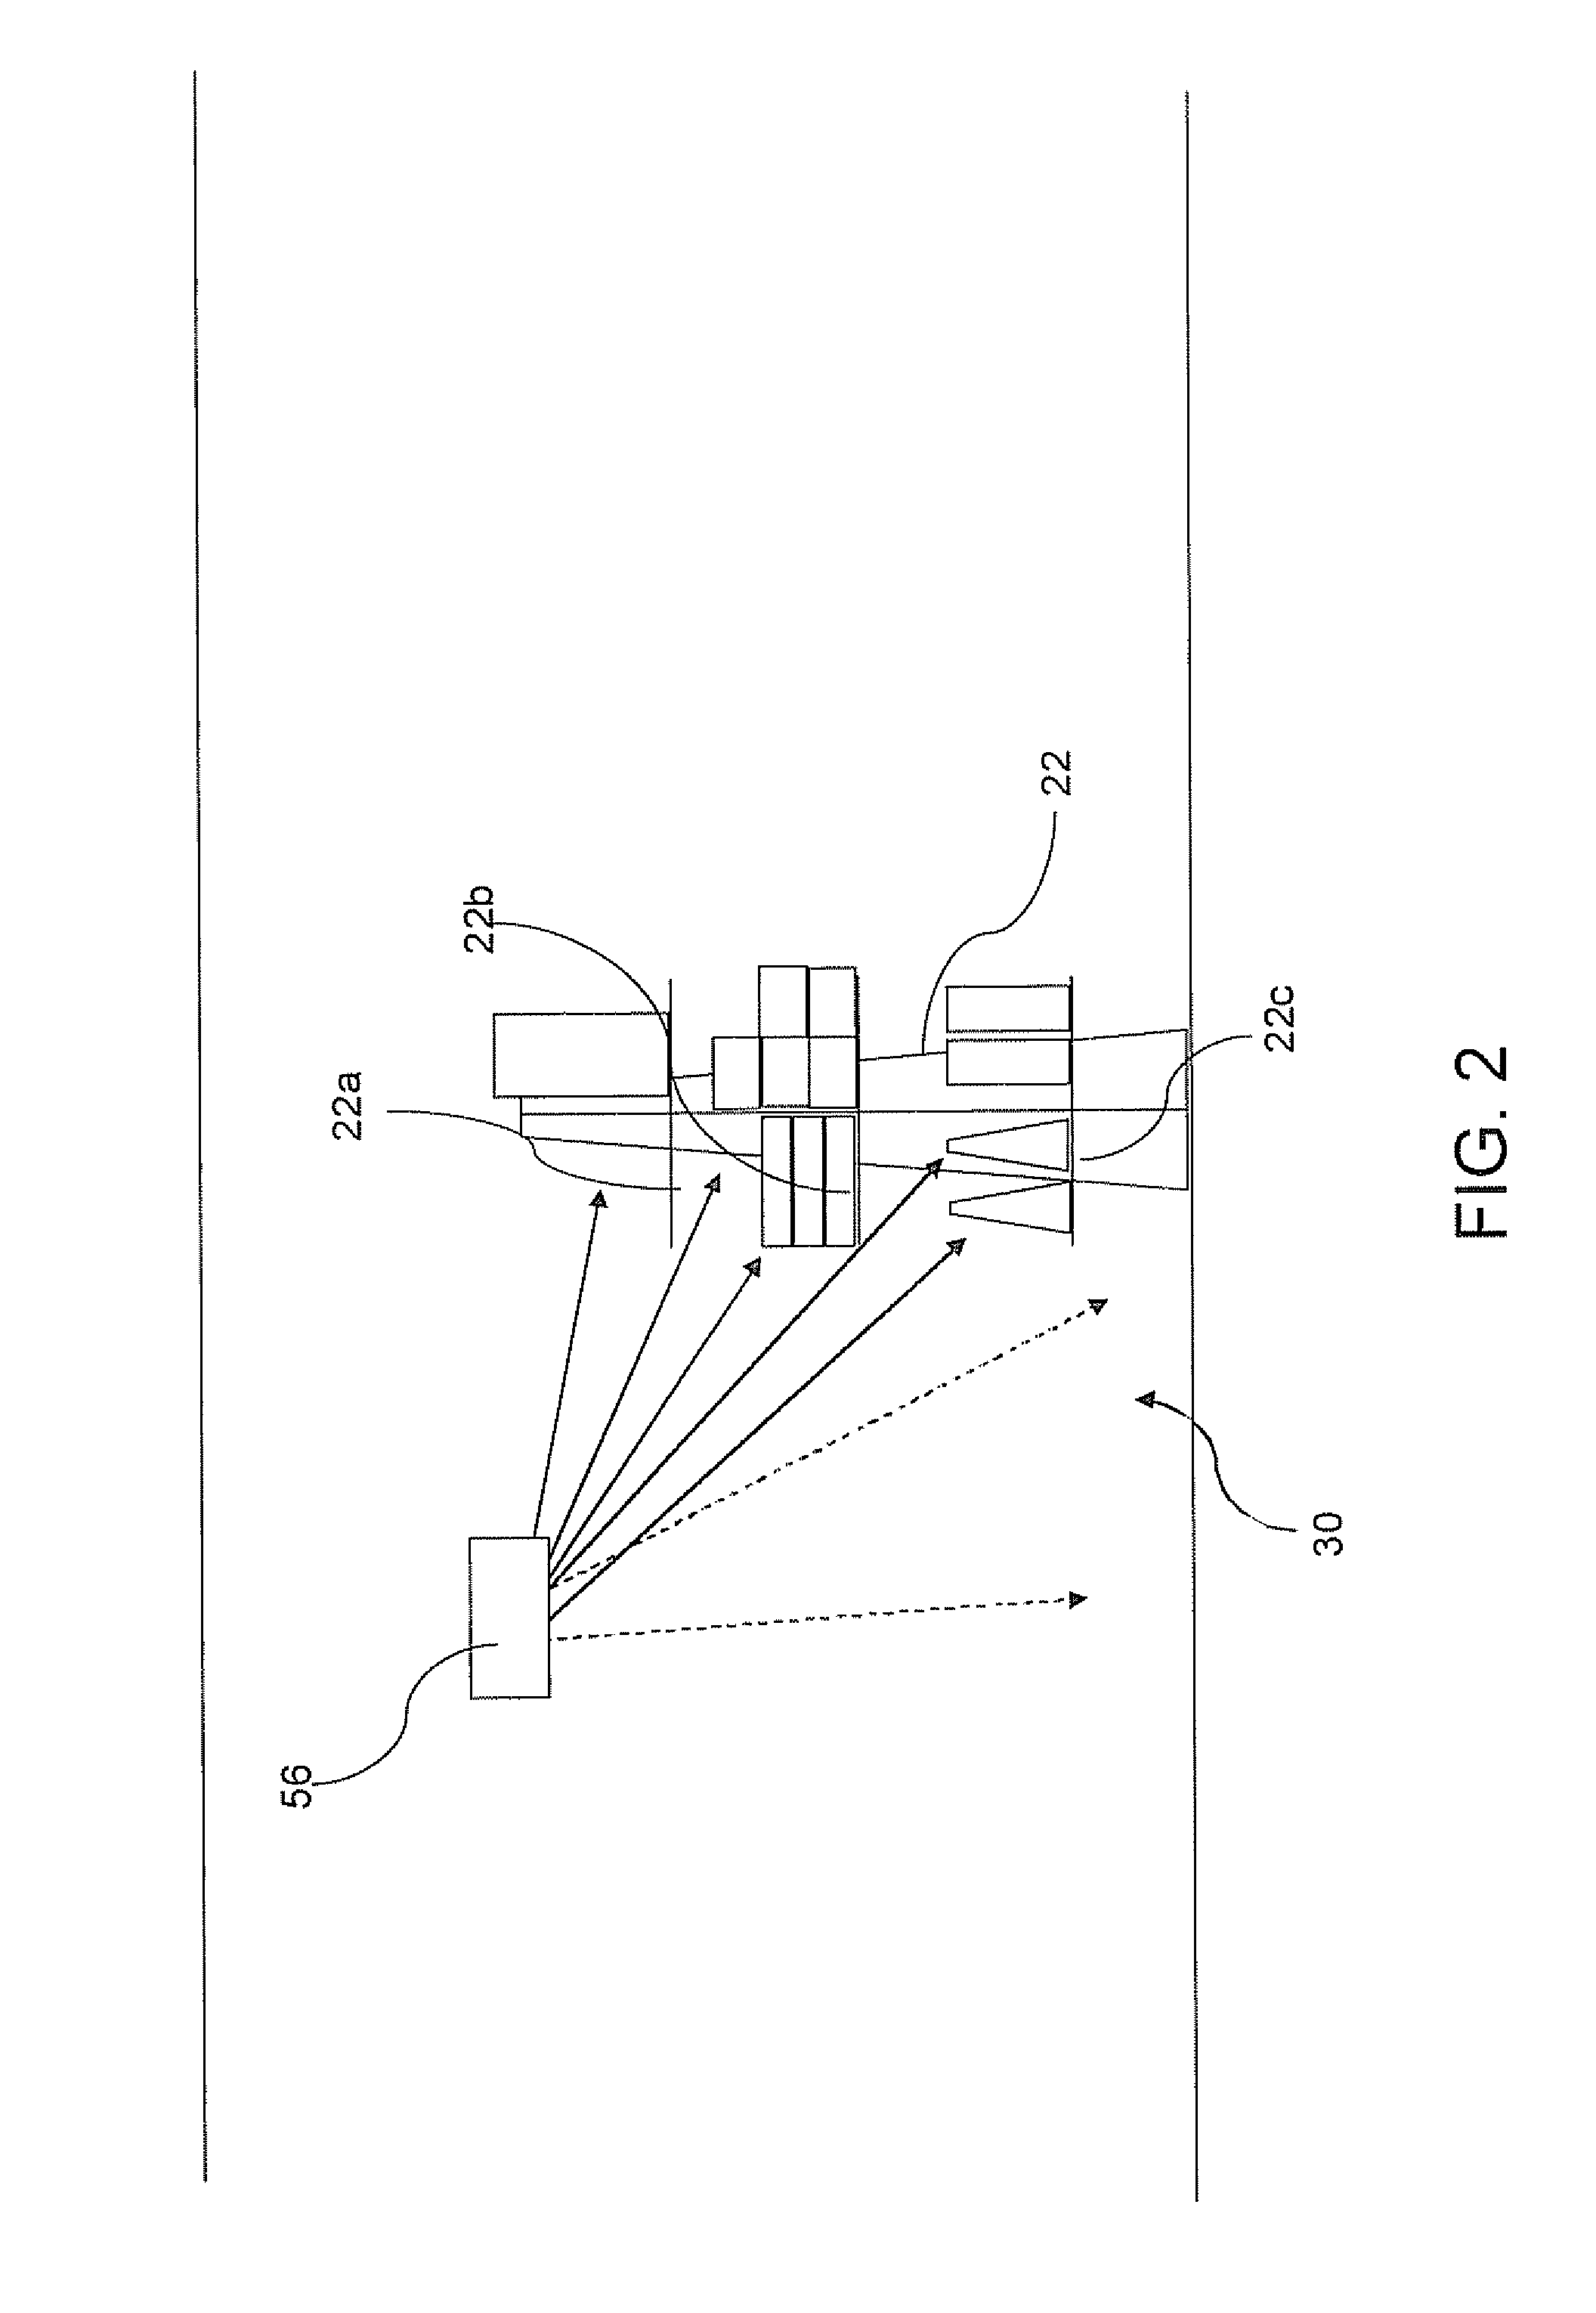 Method And System For Providing Security Surveillance And Shelf Monitoring Functions